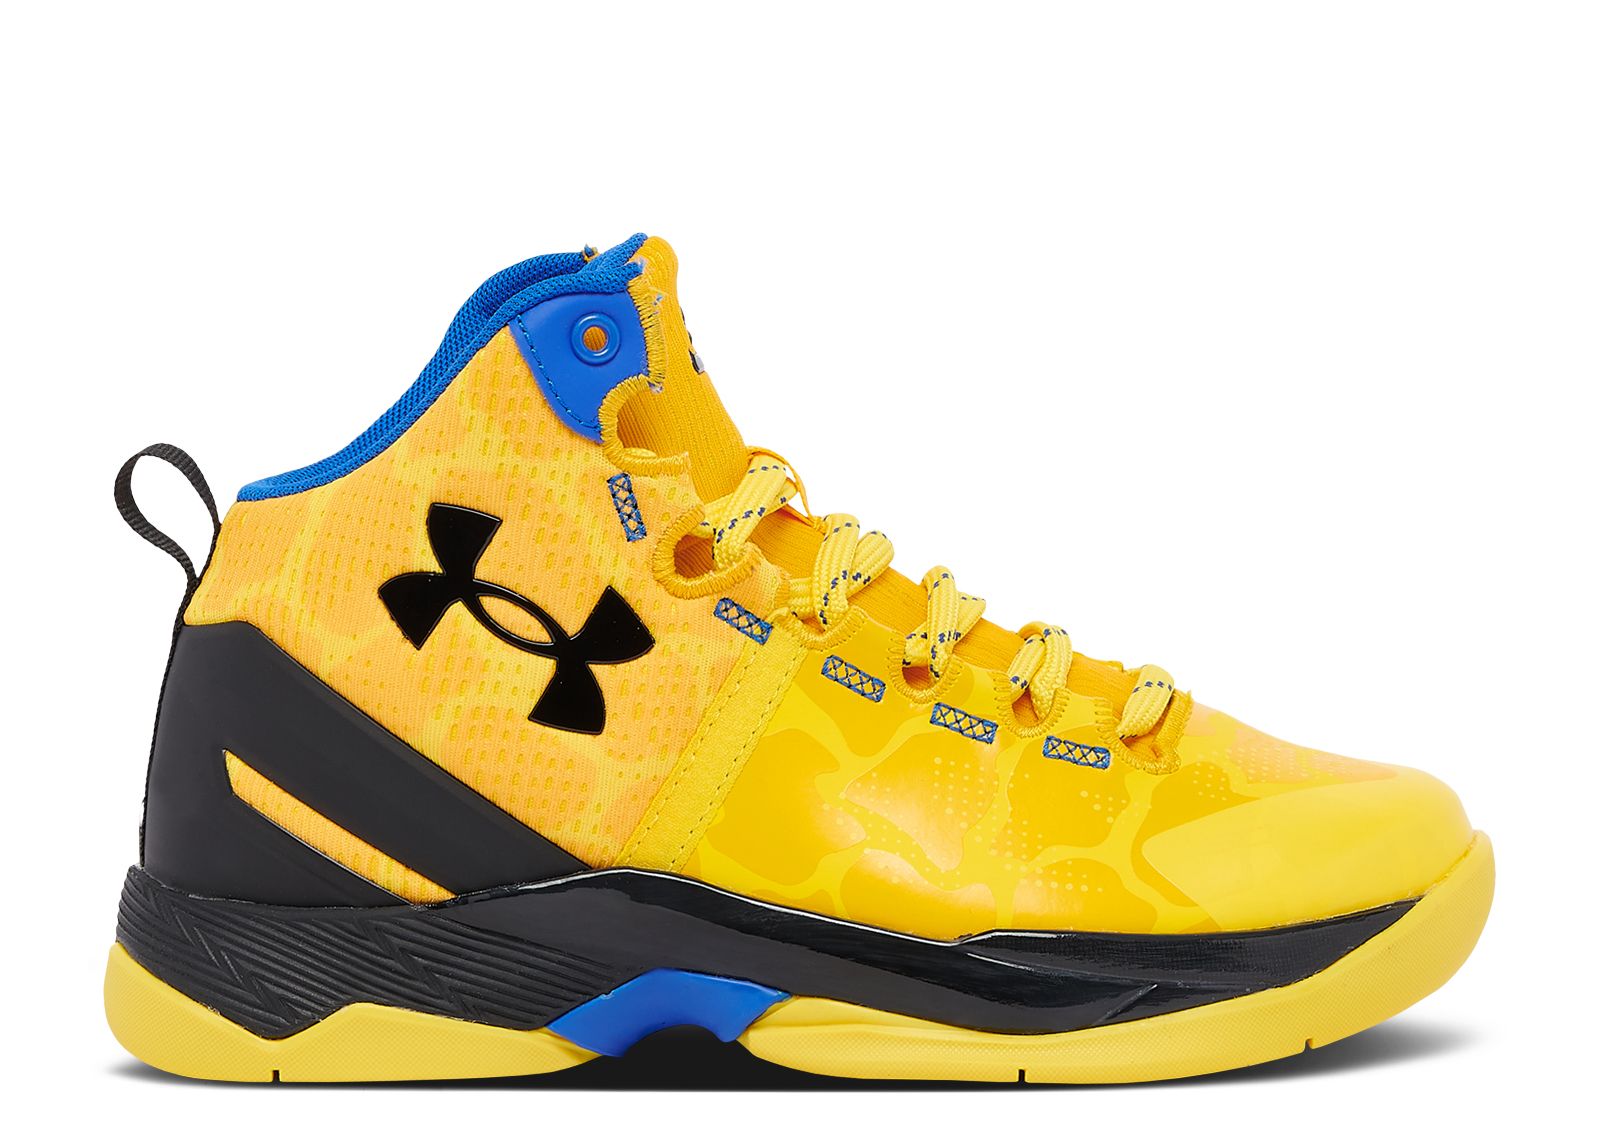 Curry 2 Retro PS 'Double Bang' - Under Armour - 3026303 700 - steeltown  gold/taxi | Flight Club Japan